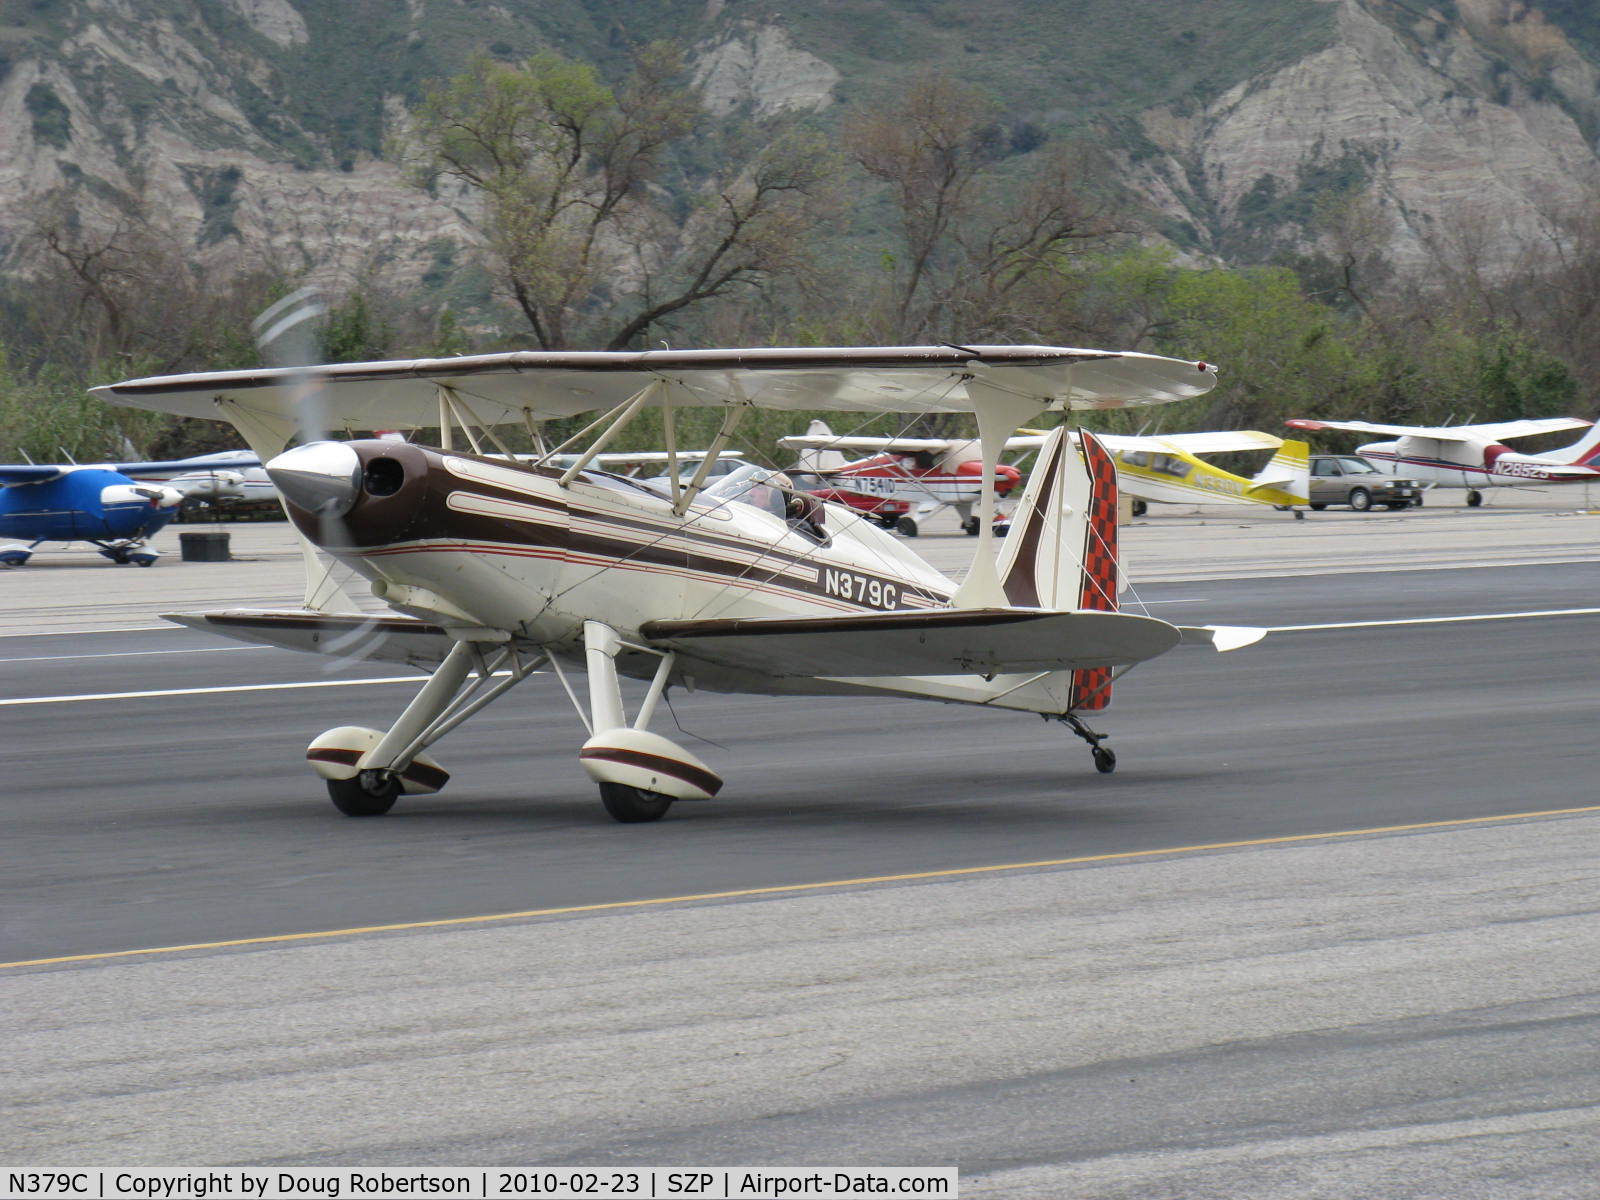 N379C, 1979 Stolp SA-300 Starduster Too C/N 502, 1979 Cleveland STARDUSTER SA-300, Lycoming IO-360, Lou Stolp design, taxi